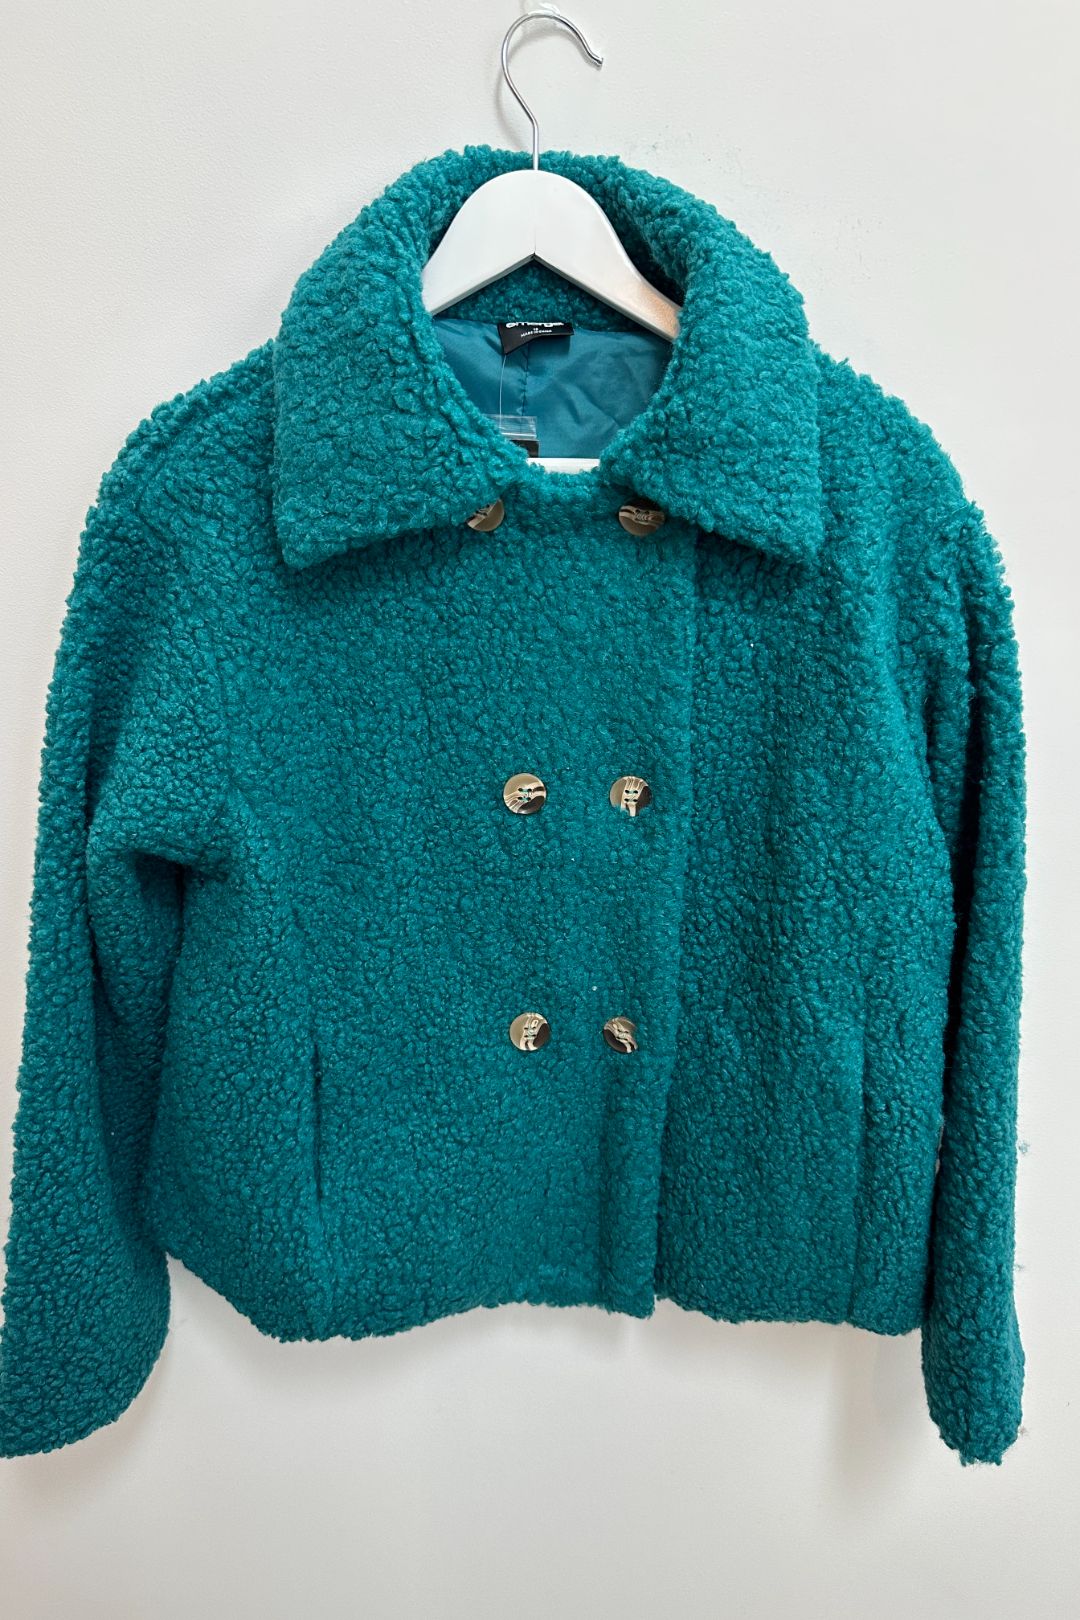 Emerge Teddy Double Breasted Jacket in Teal